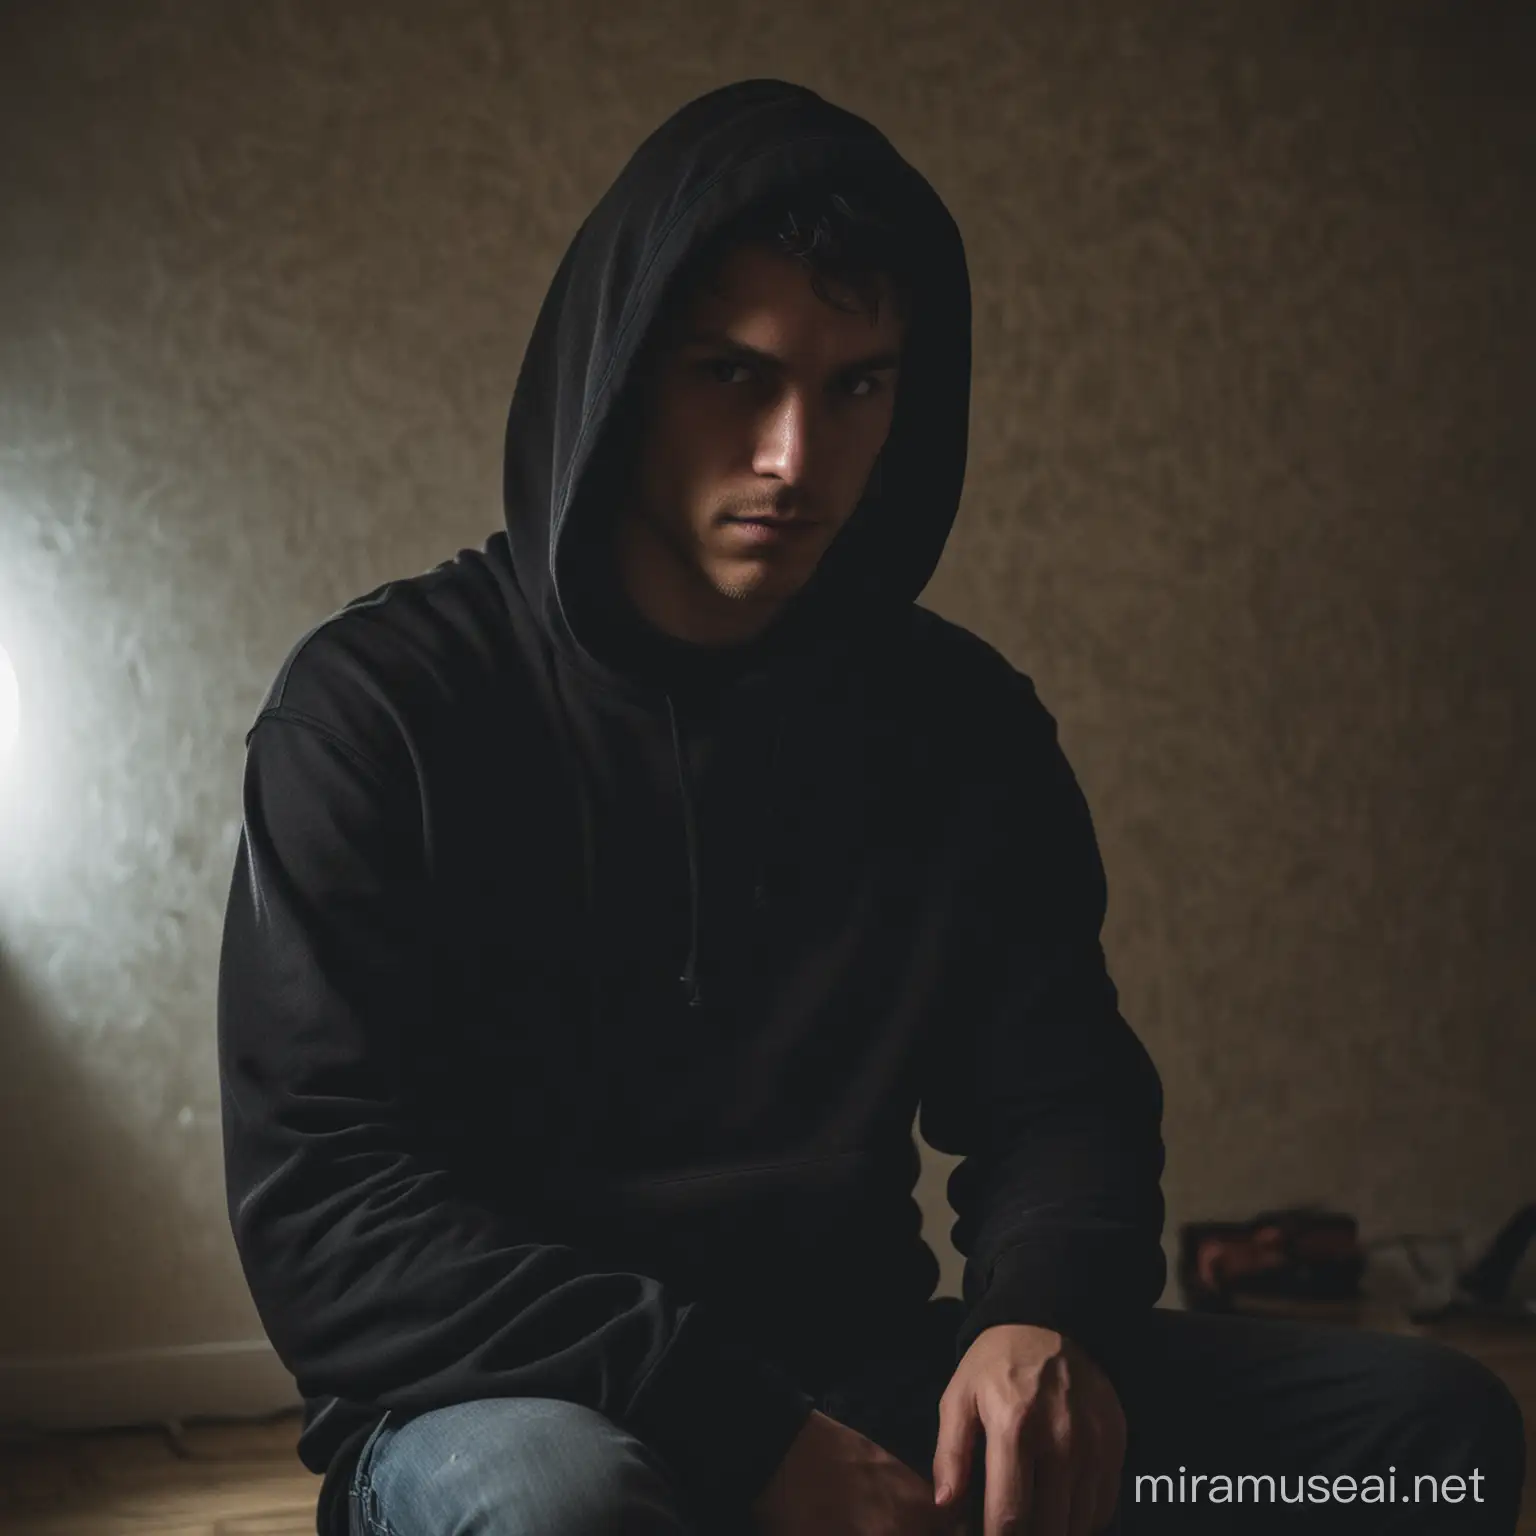 A man wearing a black hoodie sitting in a dimly lit room